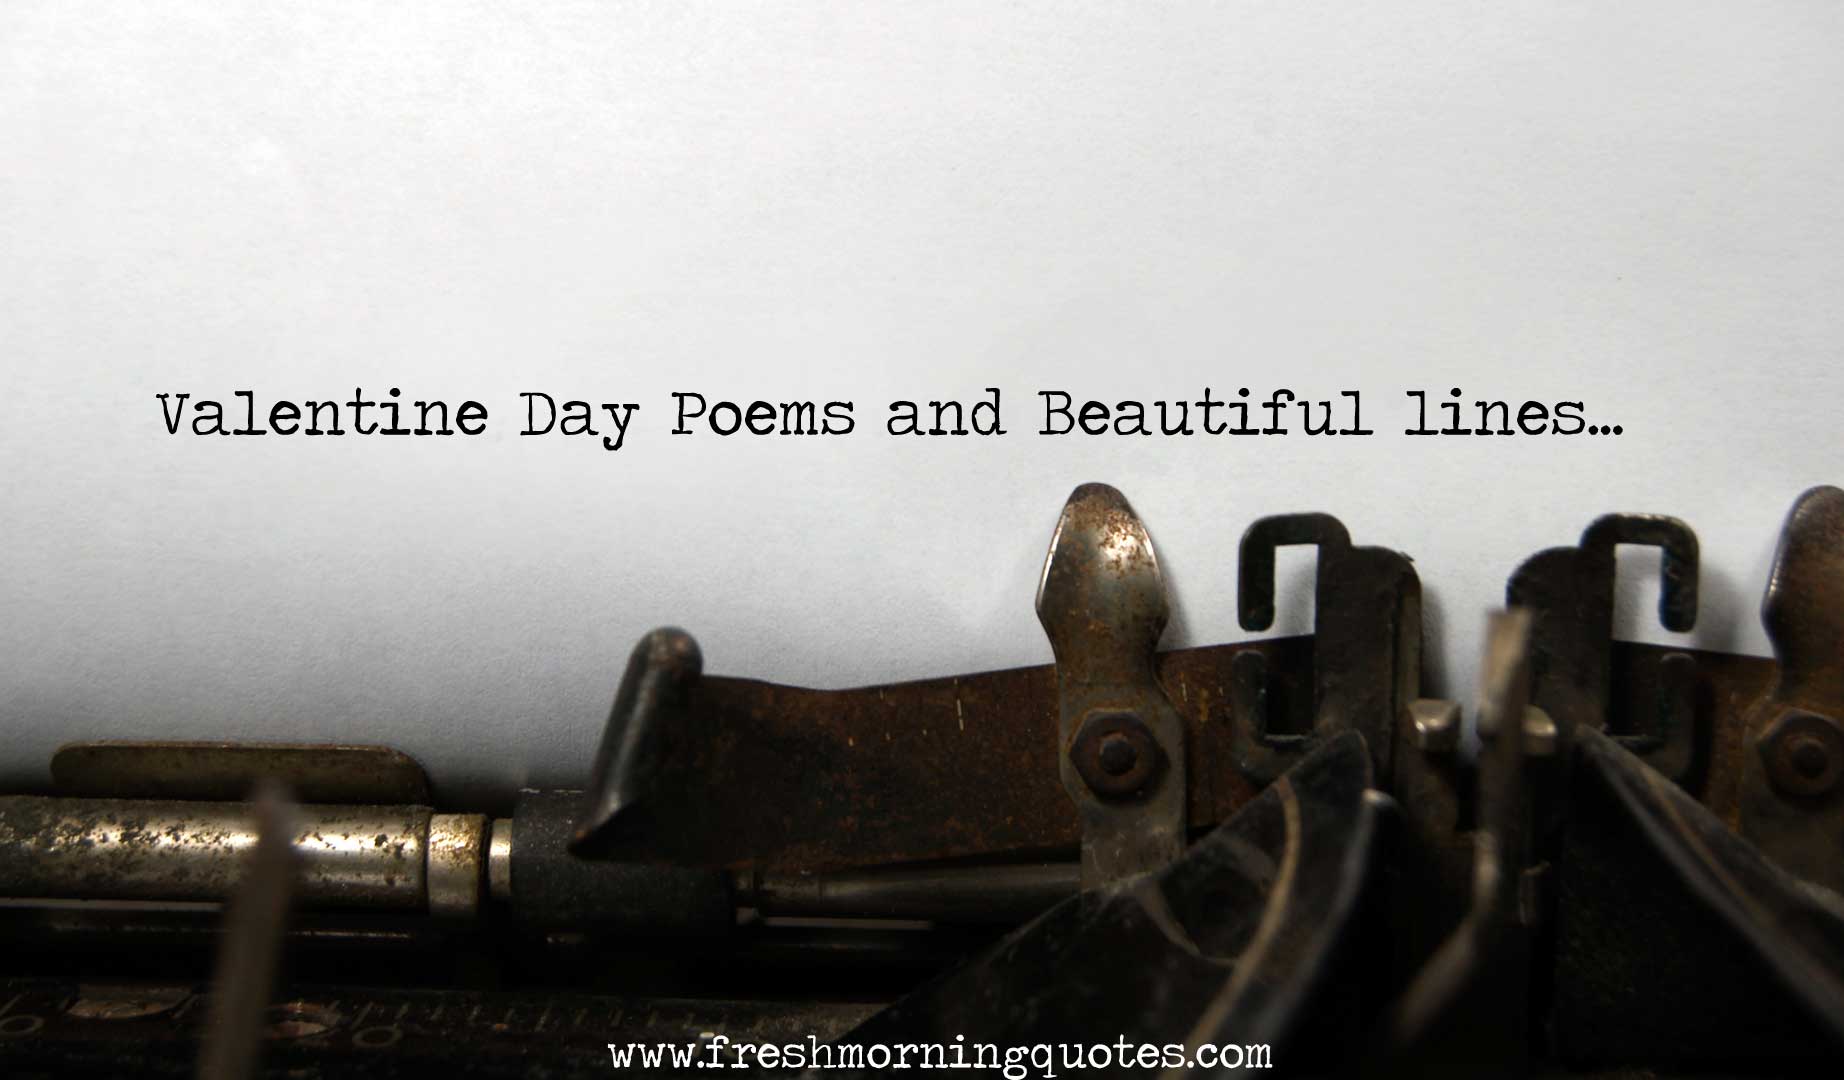 Romantic-Valentines-Day-Poems-and-Beautiful-lines